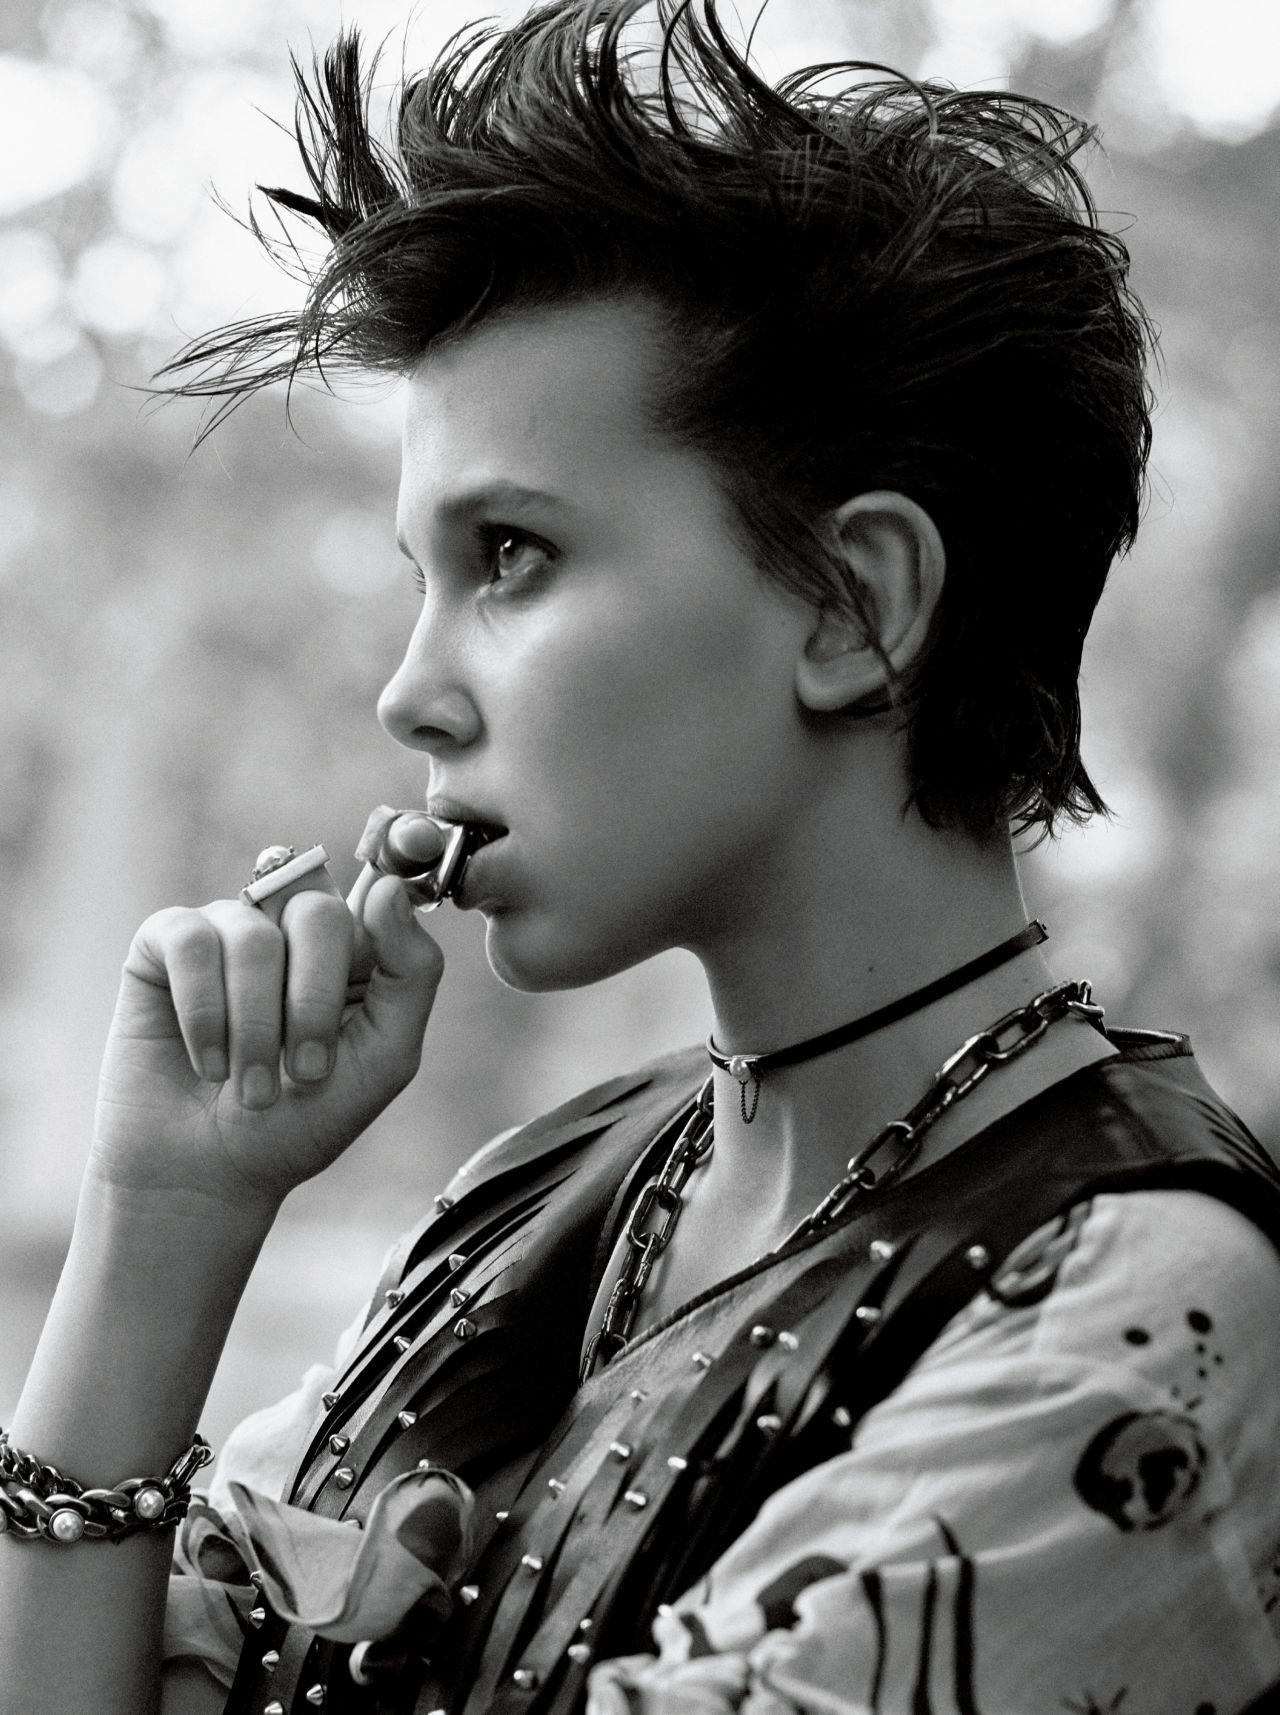 Stranger Things' Star Millie Bobby Brown Lands First American